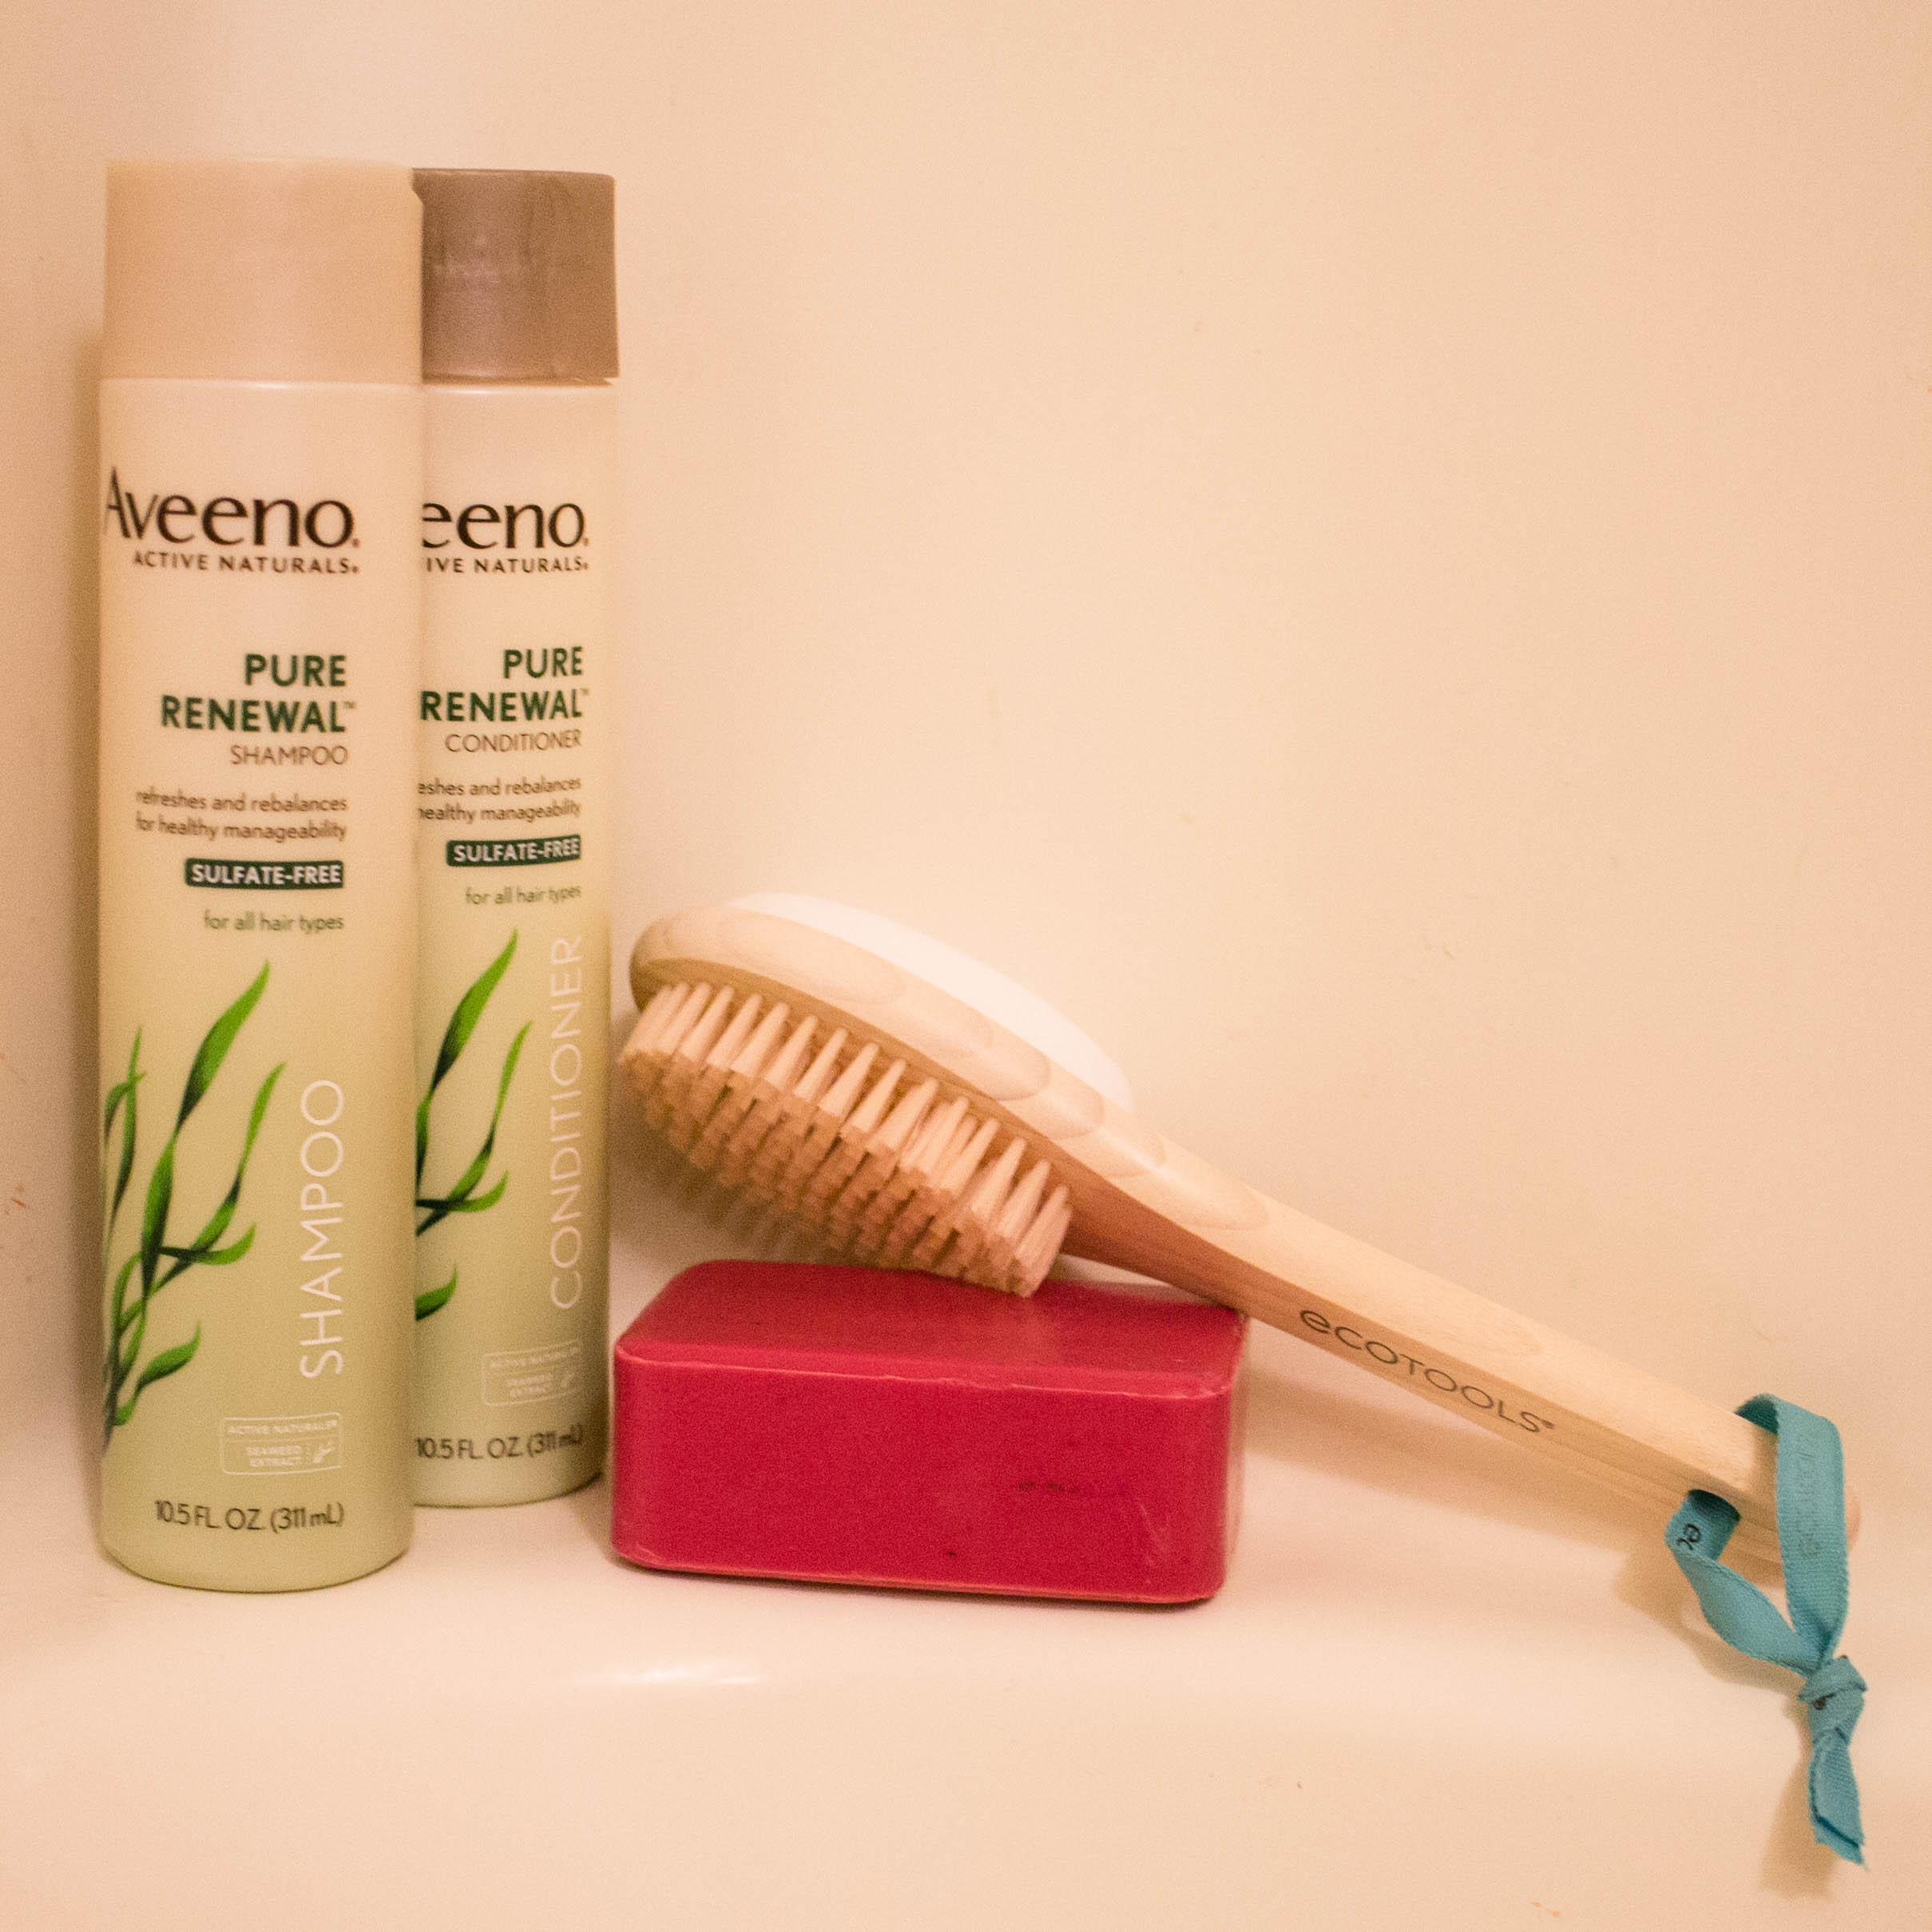 AVEENO PURE RENEWAL® Shampoo and Conditioner contains naturally derived cleansers and a sulfate free formula that gently cleans your hair and scalp